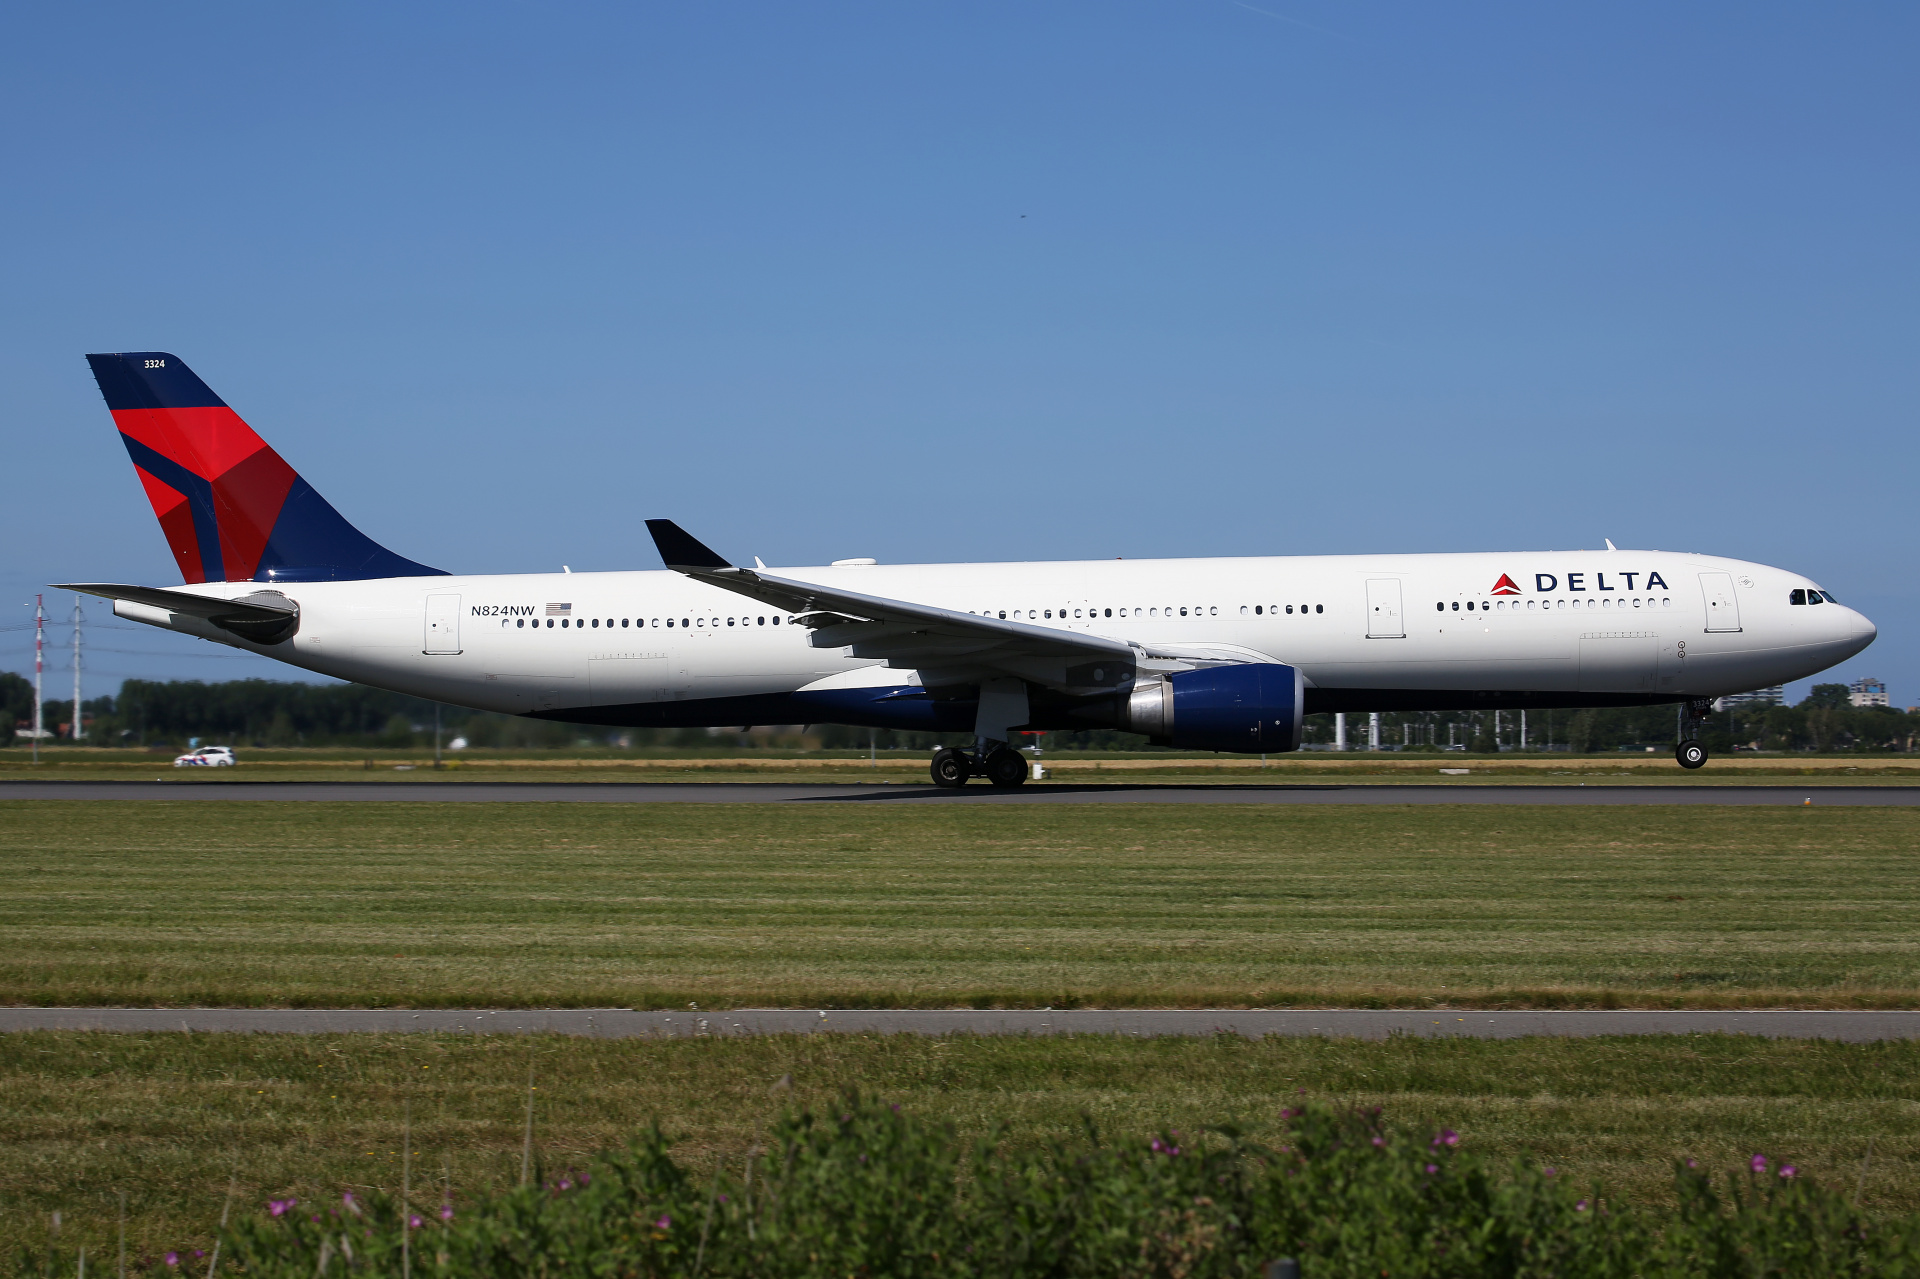 N824NW (Aircraft » Schiphol Spotting » Airbus A330-300 » Delta Airlines)